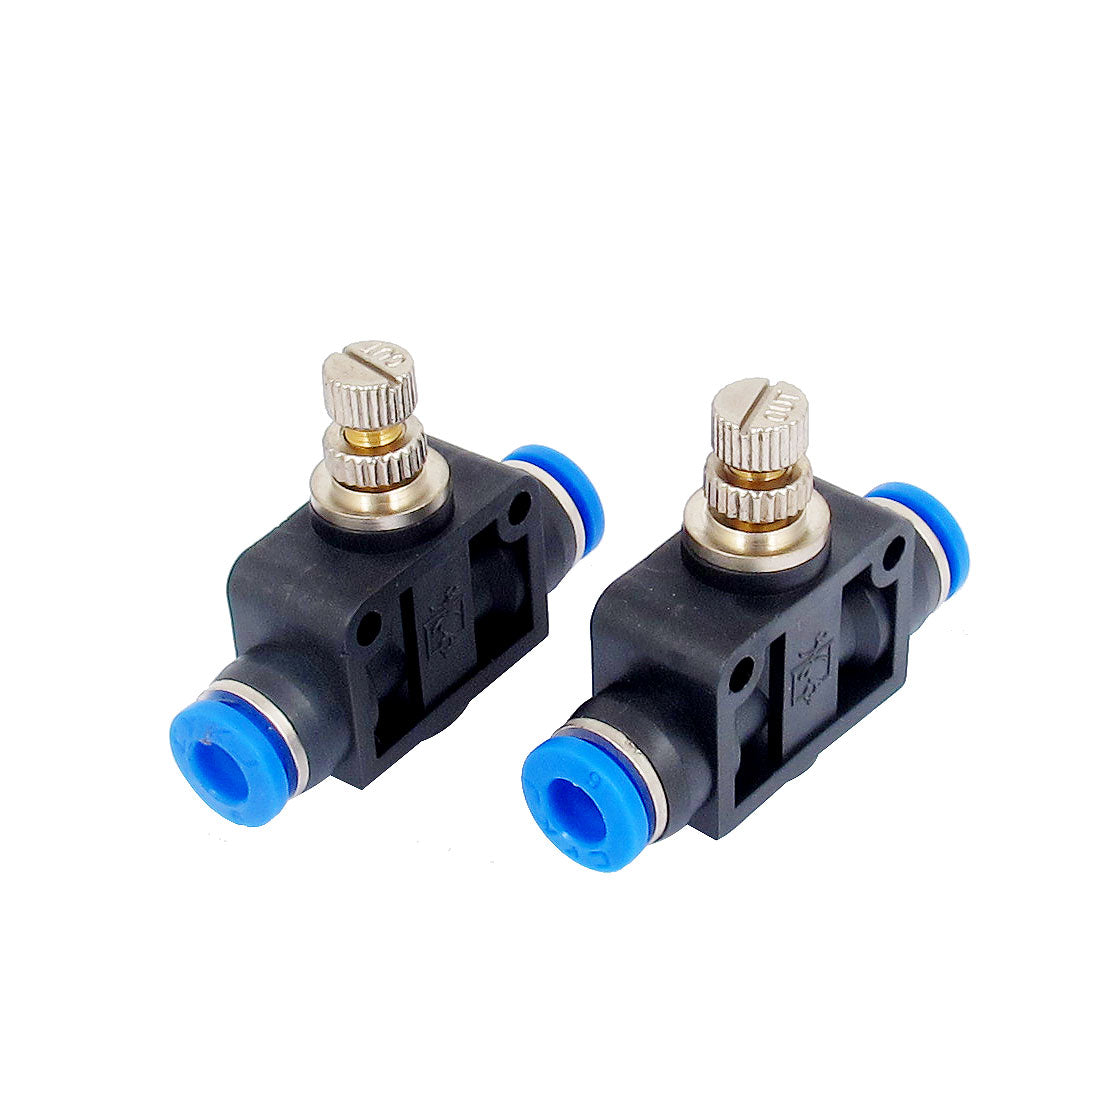 uxcell Uxcell 2pcs 6mm OD Tube Union Air Flow Speed Control Valve Pneumatic Push in Fittings